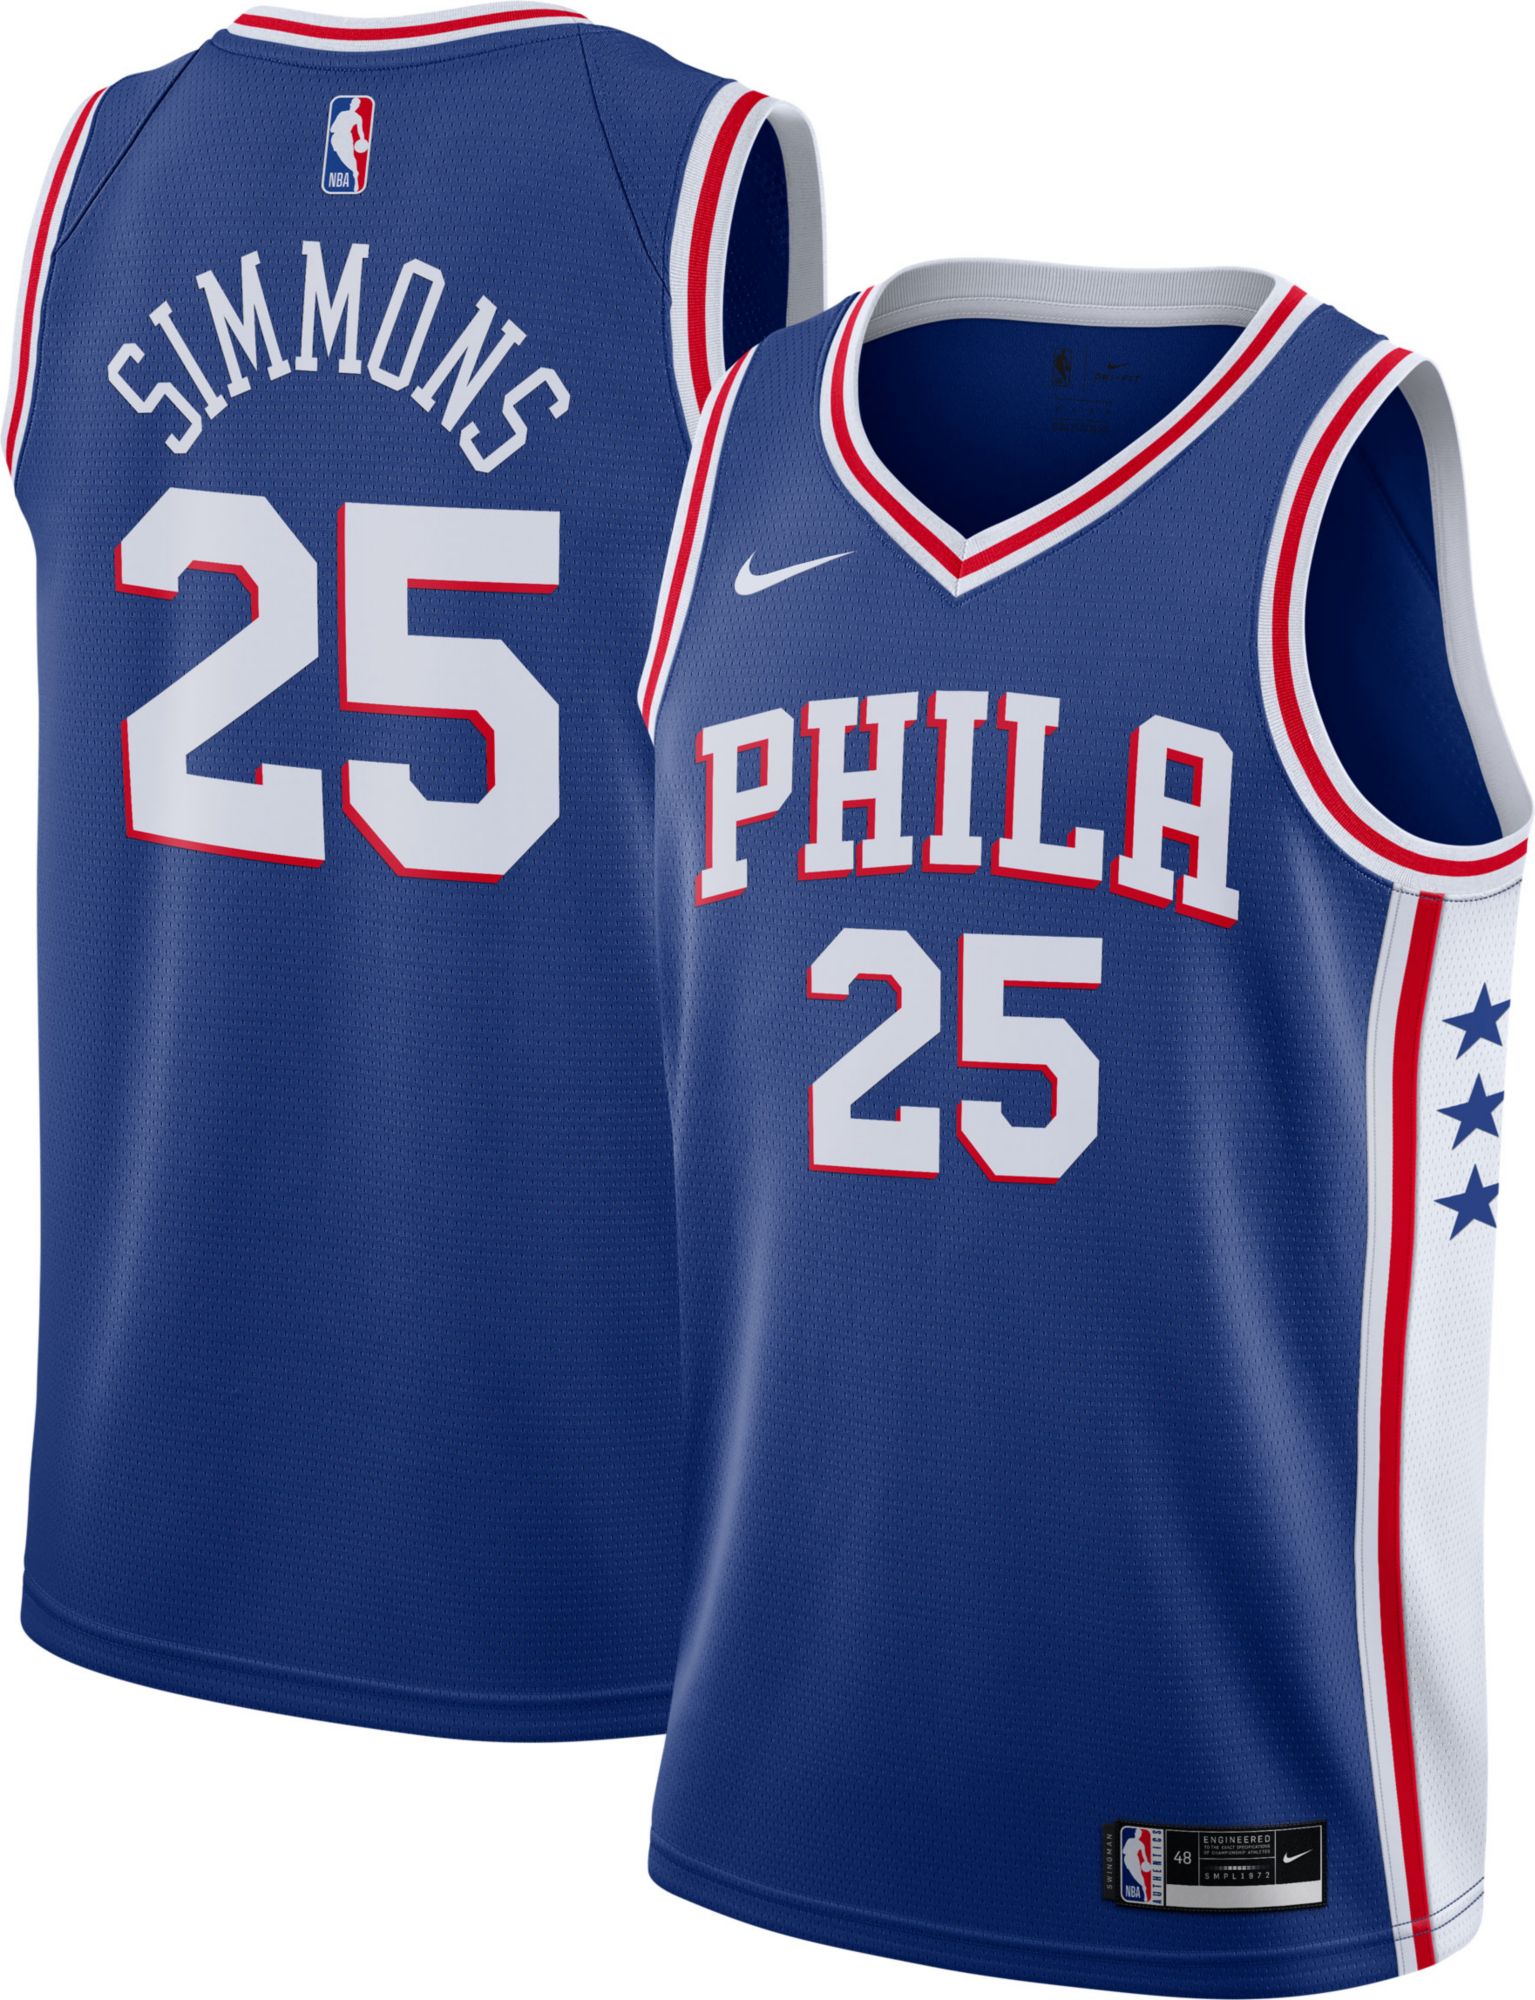 76ers jerseys for sale